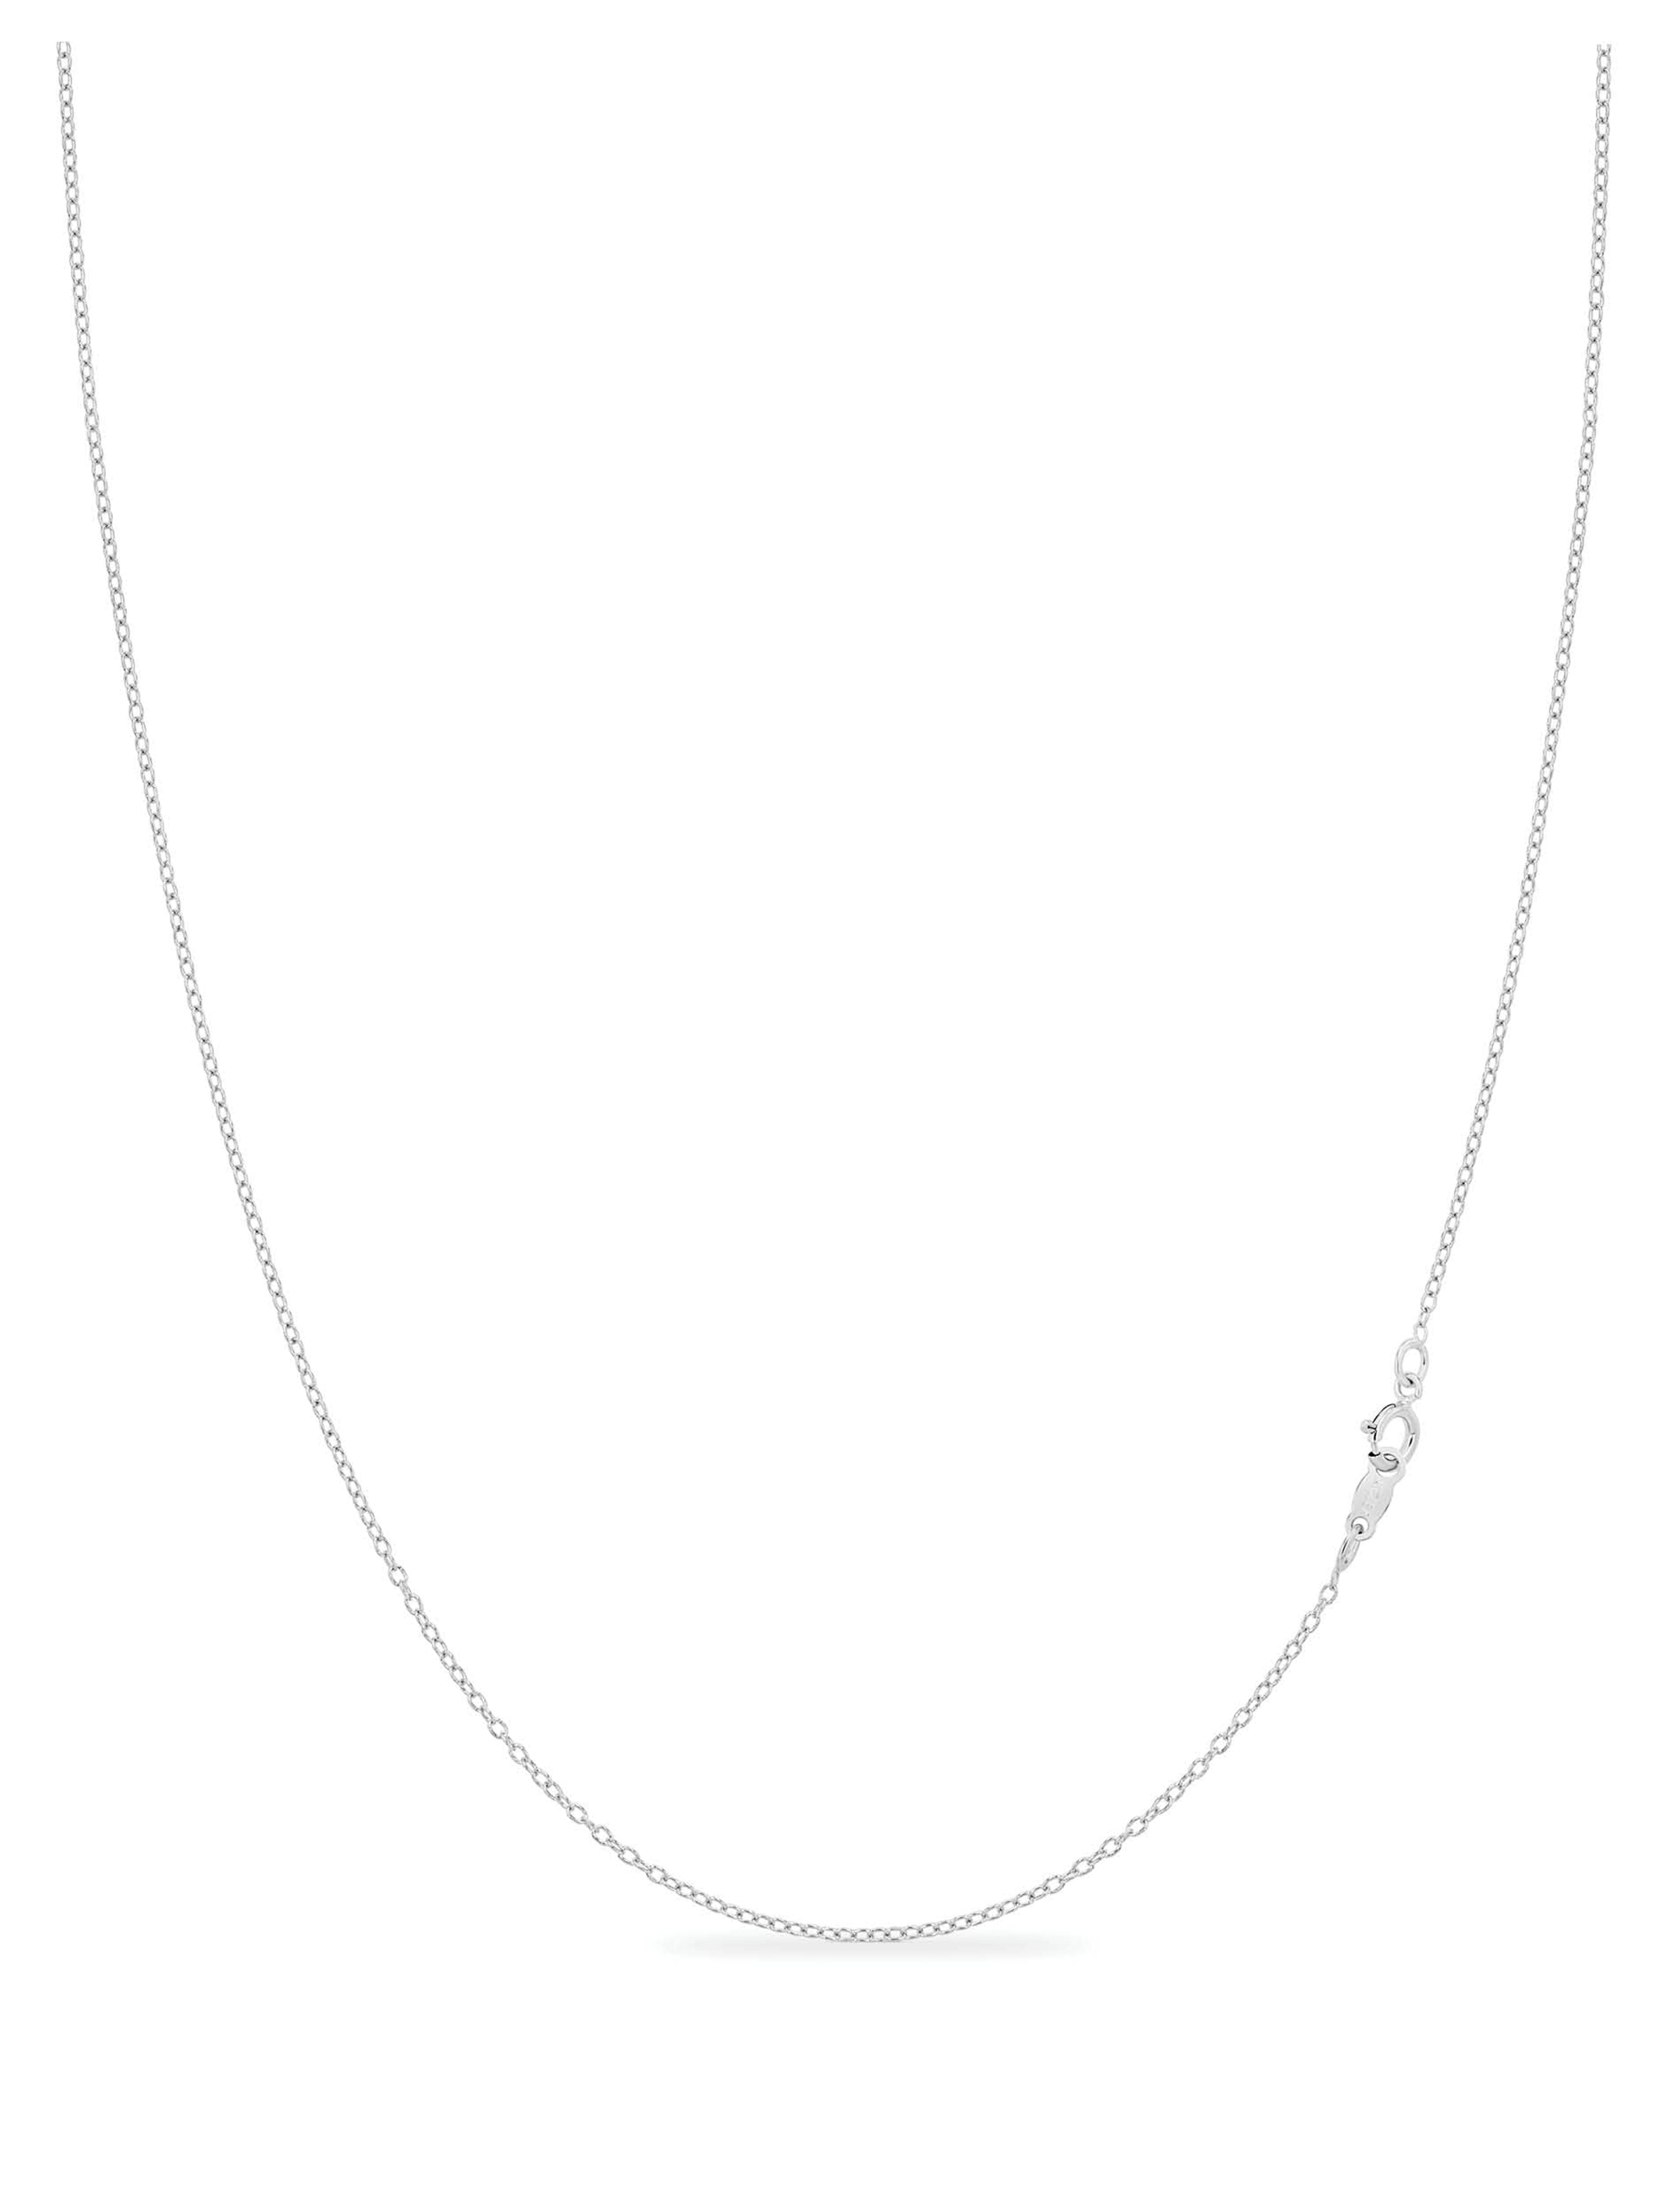 KEZEF Sterling Silver Cable Chain